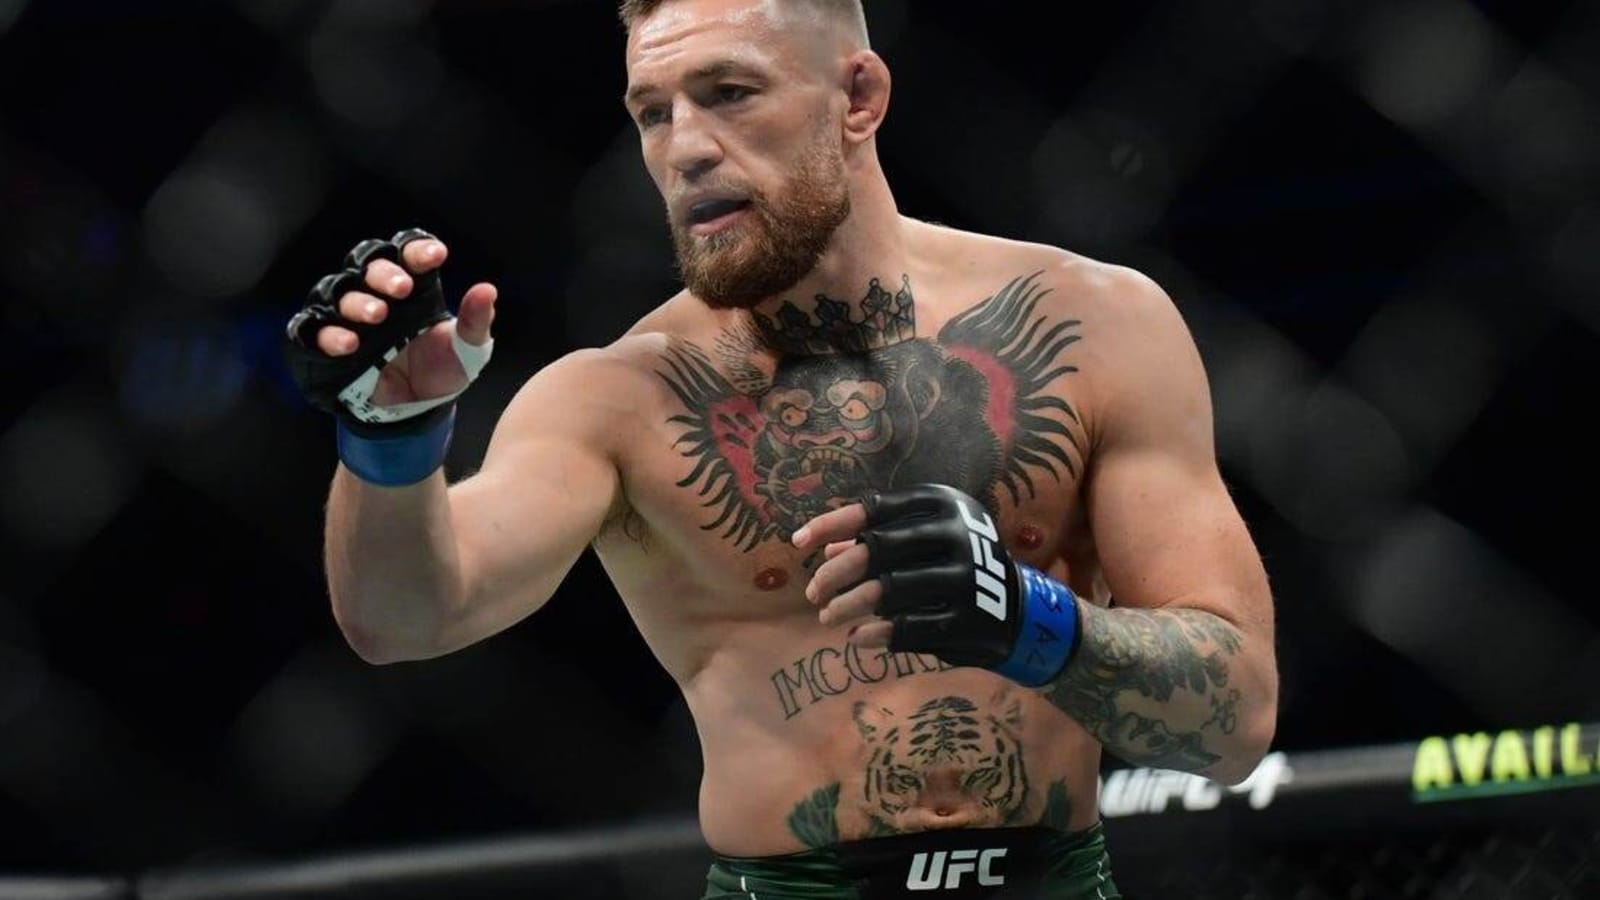 USADA to split with UFC over Conor McGregor, testing policy